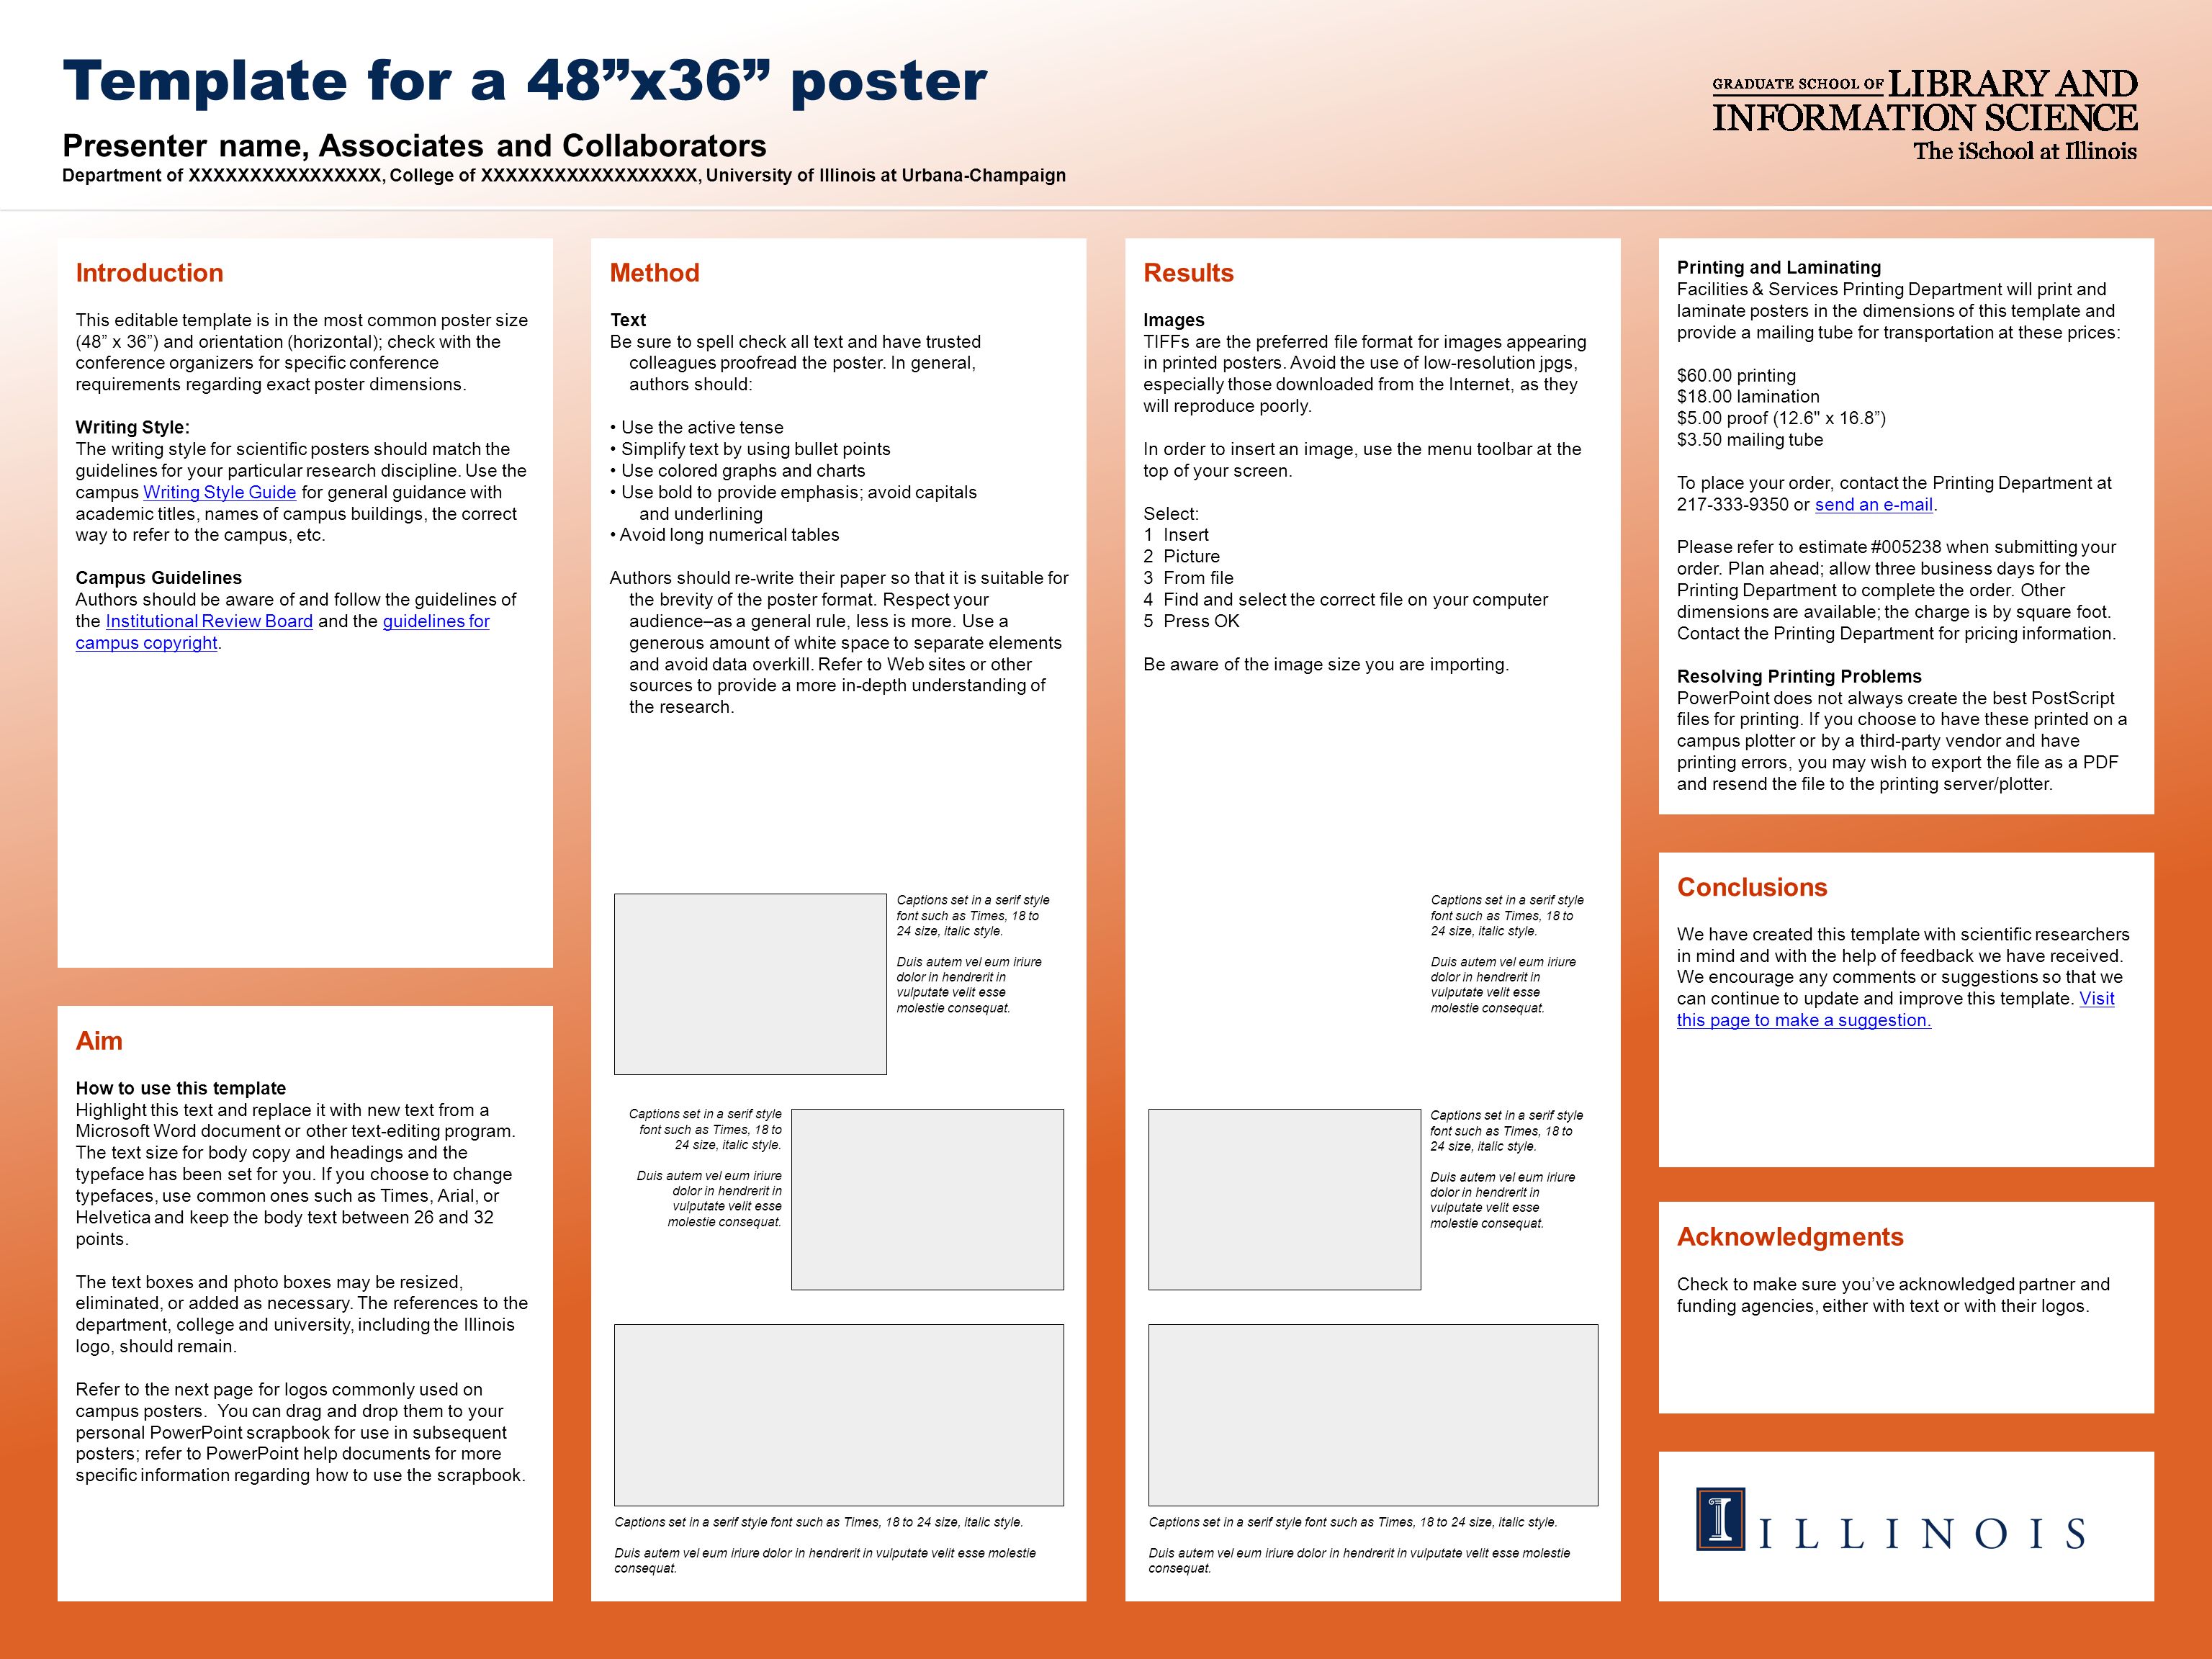 Presenter name, Associates and Collaborators Department of XXXXXXXXXXXXXXXX, College of XXXXXXXXXXXXXXXXXX, University of Illinois at Urbana-Champaign Template for a 48 x36 poster Acknowledgments Check to make sure you’ve acknowledged partner and funding agencies, either with text or with their logos.